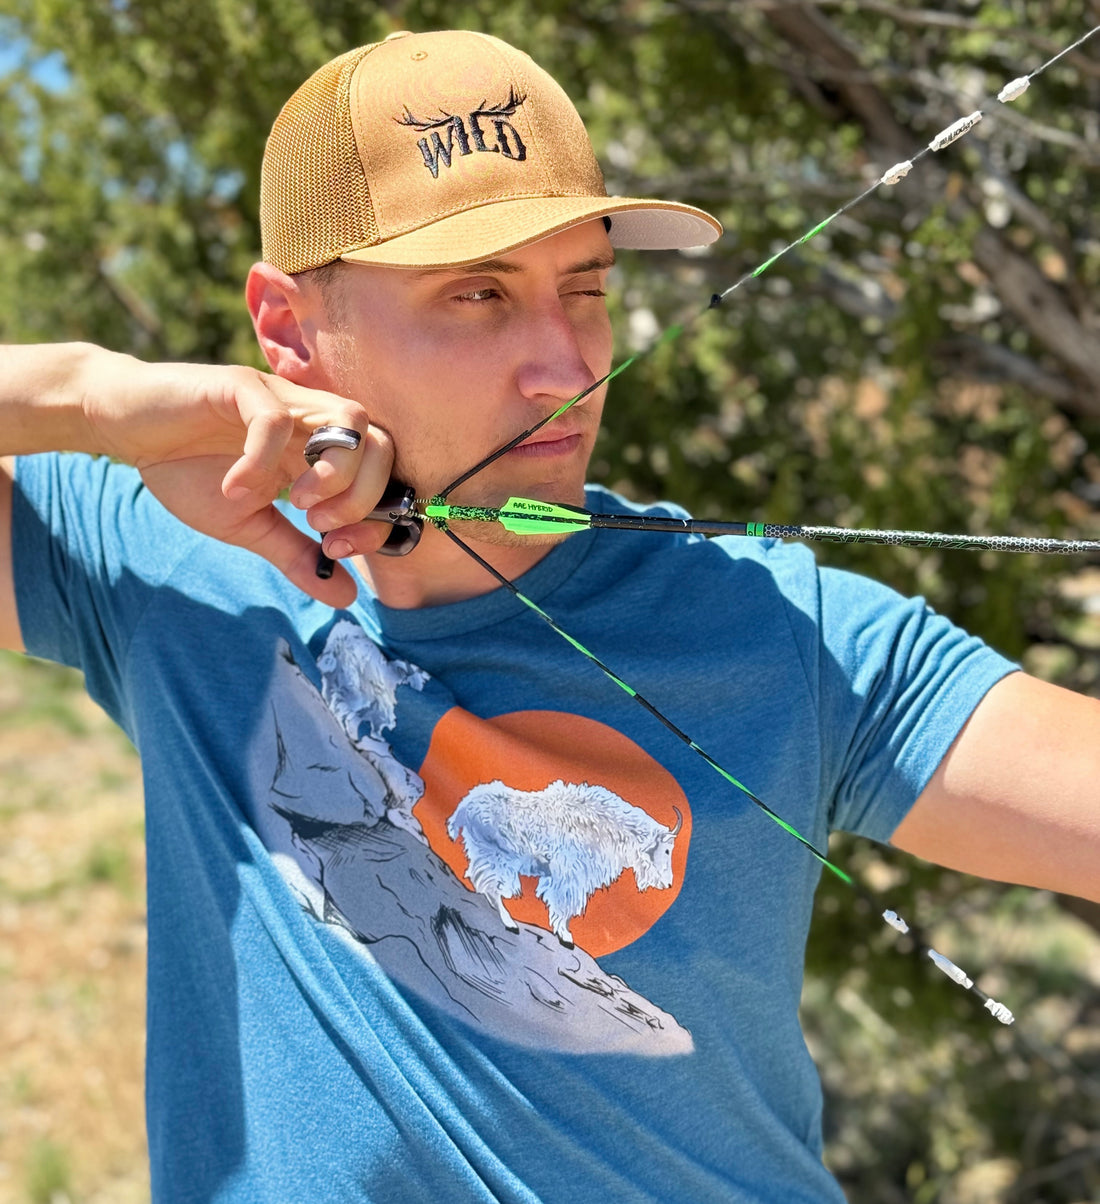  Man at full draw shooting a compound archery bow and wearing a WILD antler logo copper hat from River to Ridge Clothing Brand